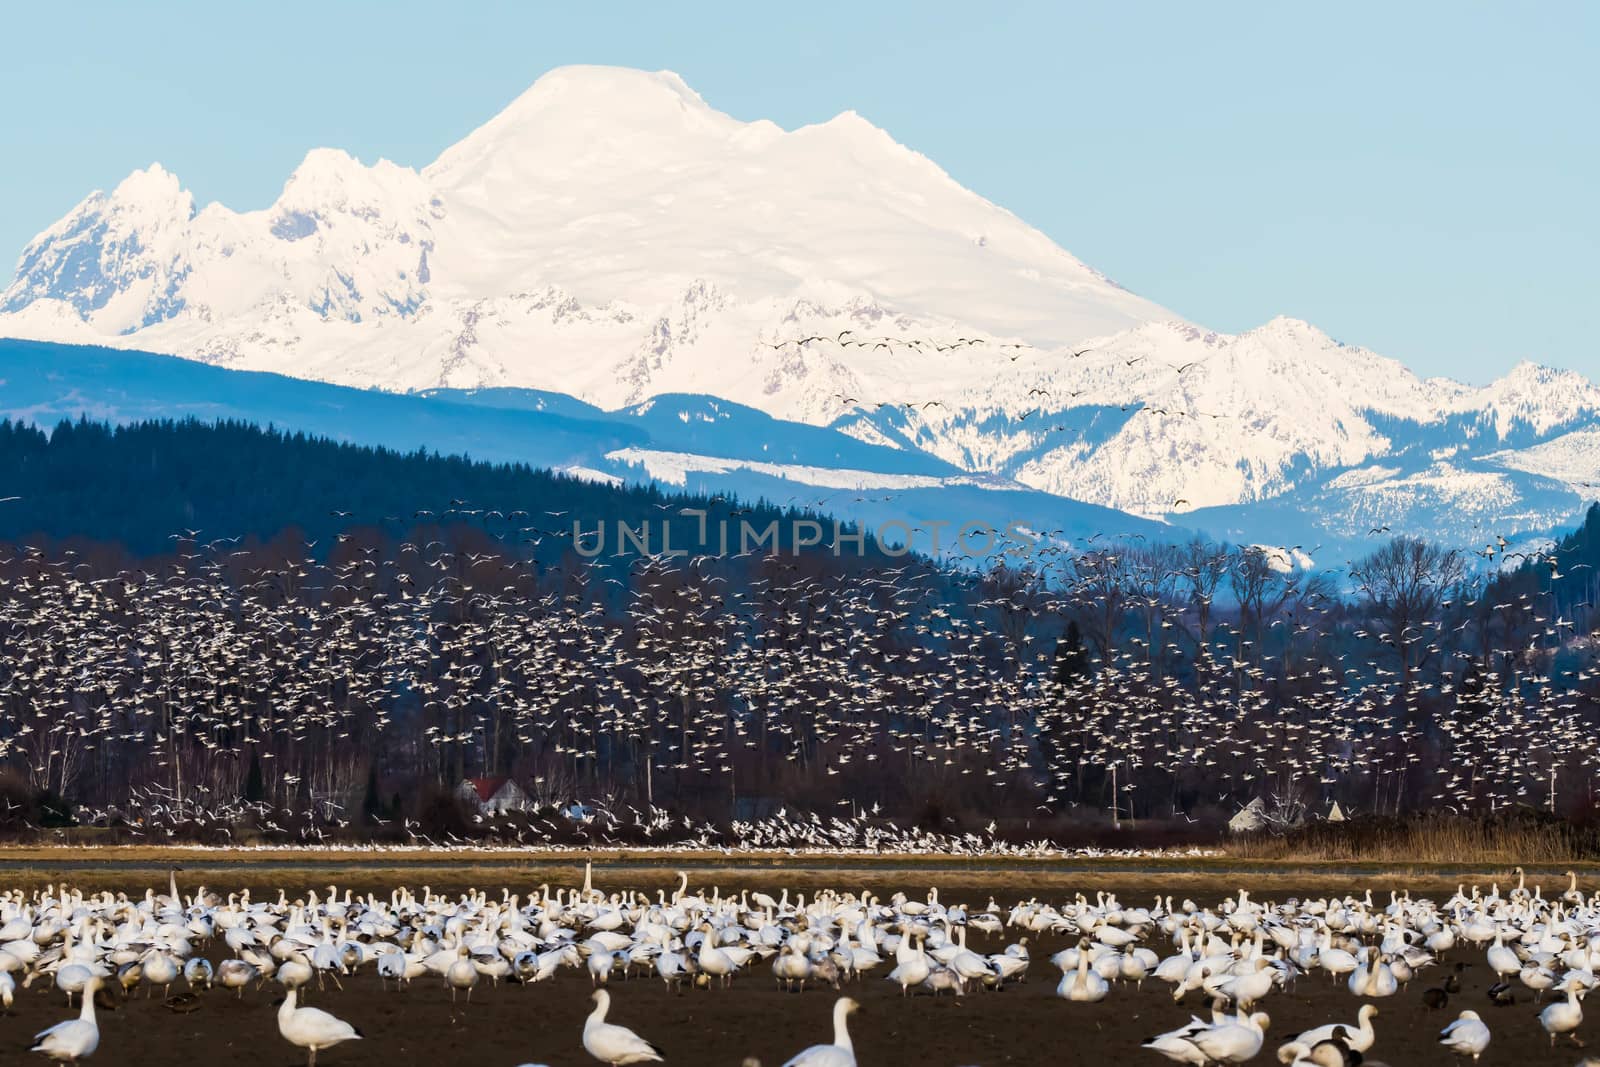 Snow Geese Feeding during their annual migration in Skagit Valley, WA